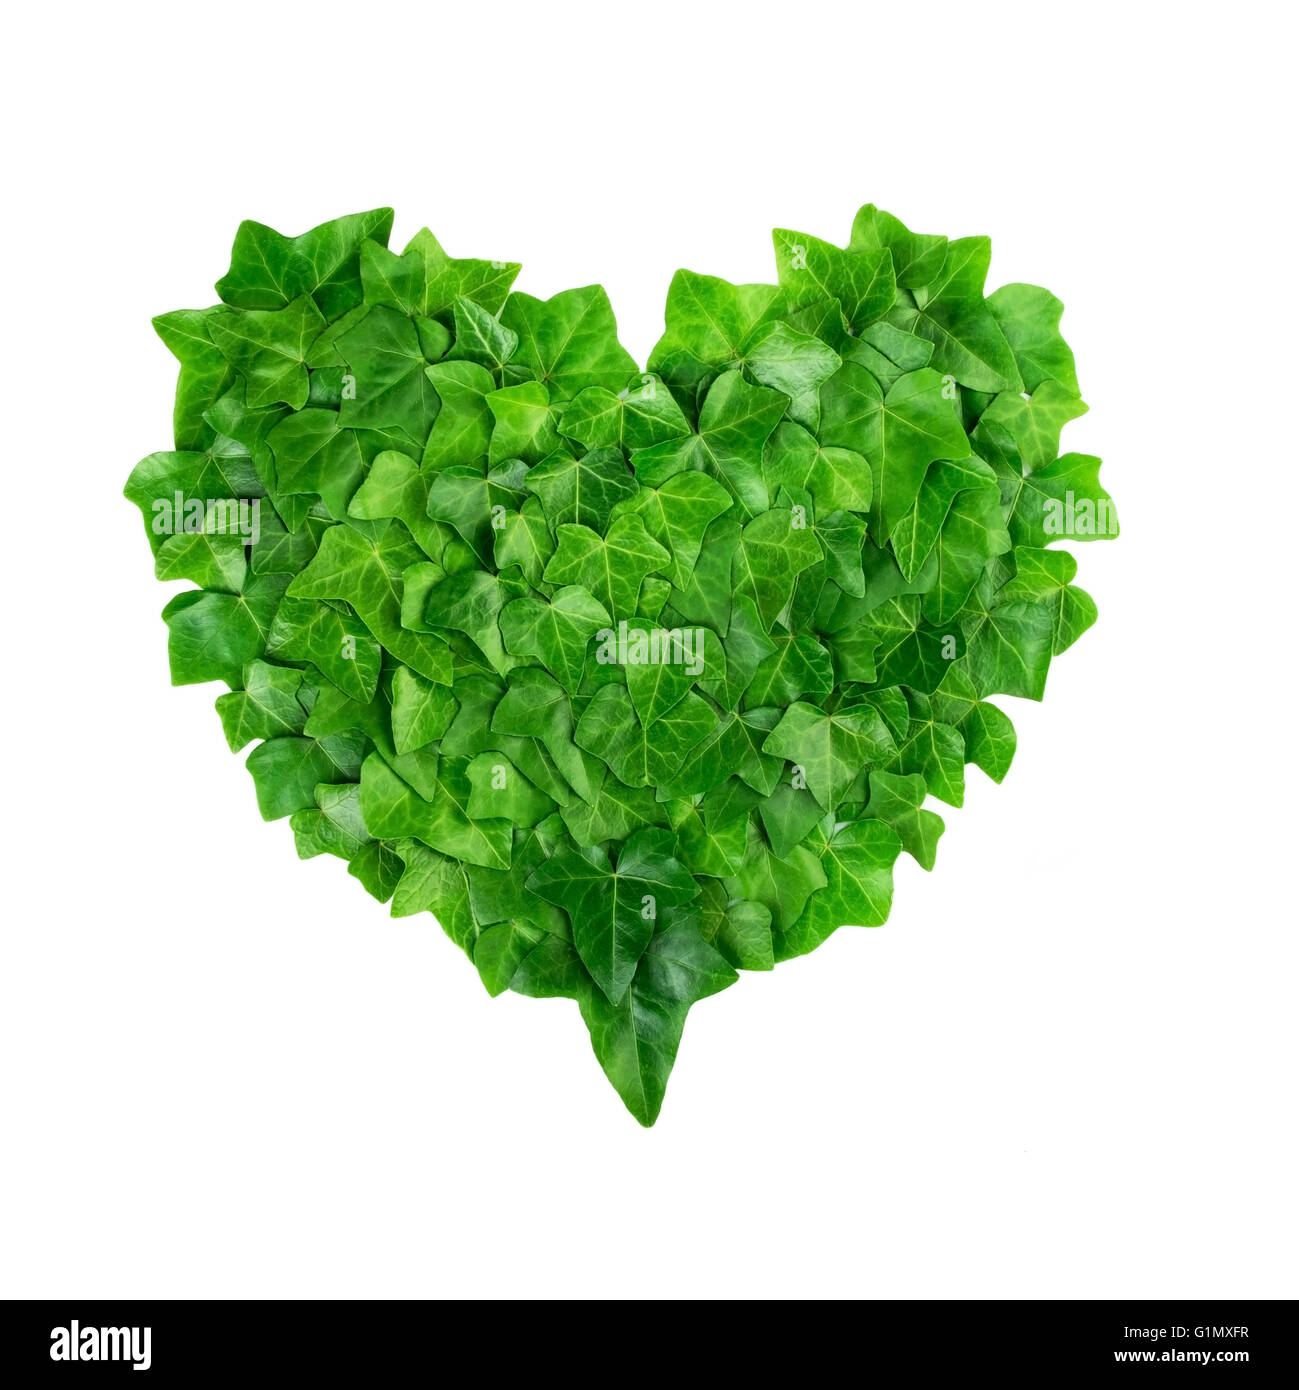 Natural pattern from ivy leaves in a heart shape on white background. Nature protection concept. Stock Photo